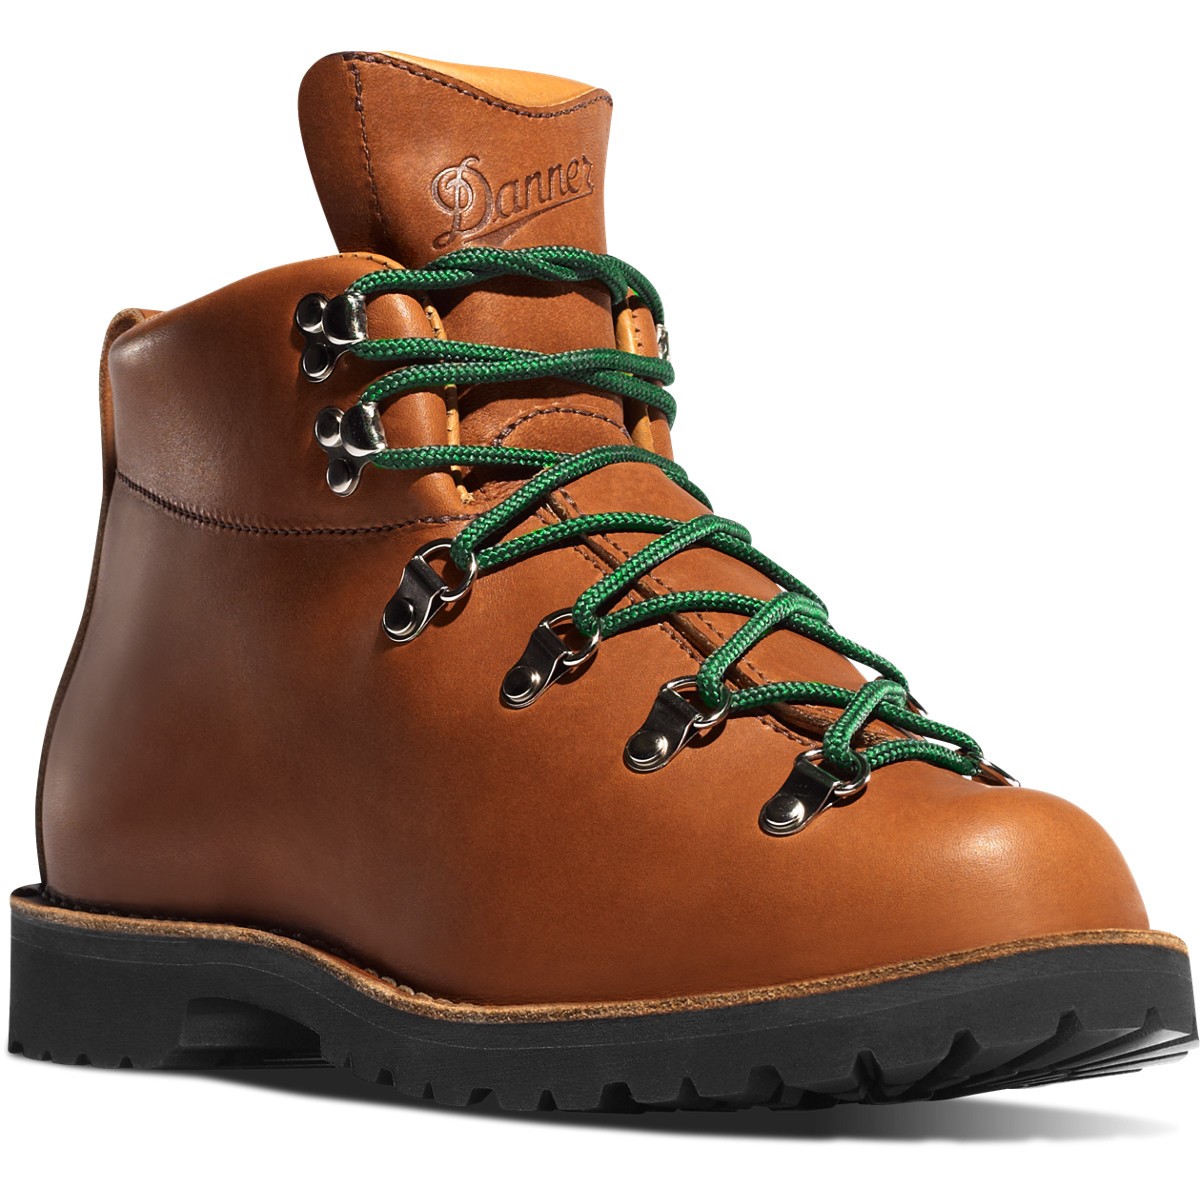 Danner Mountain Trail Hiking Boot